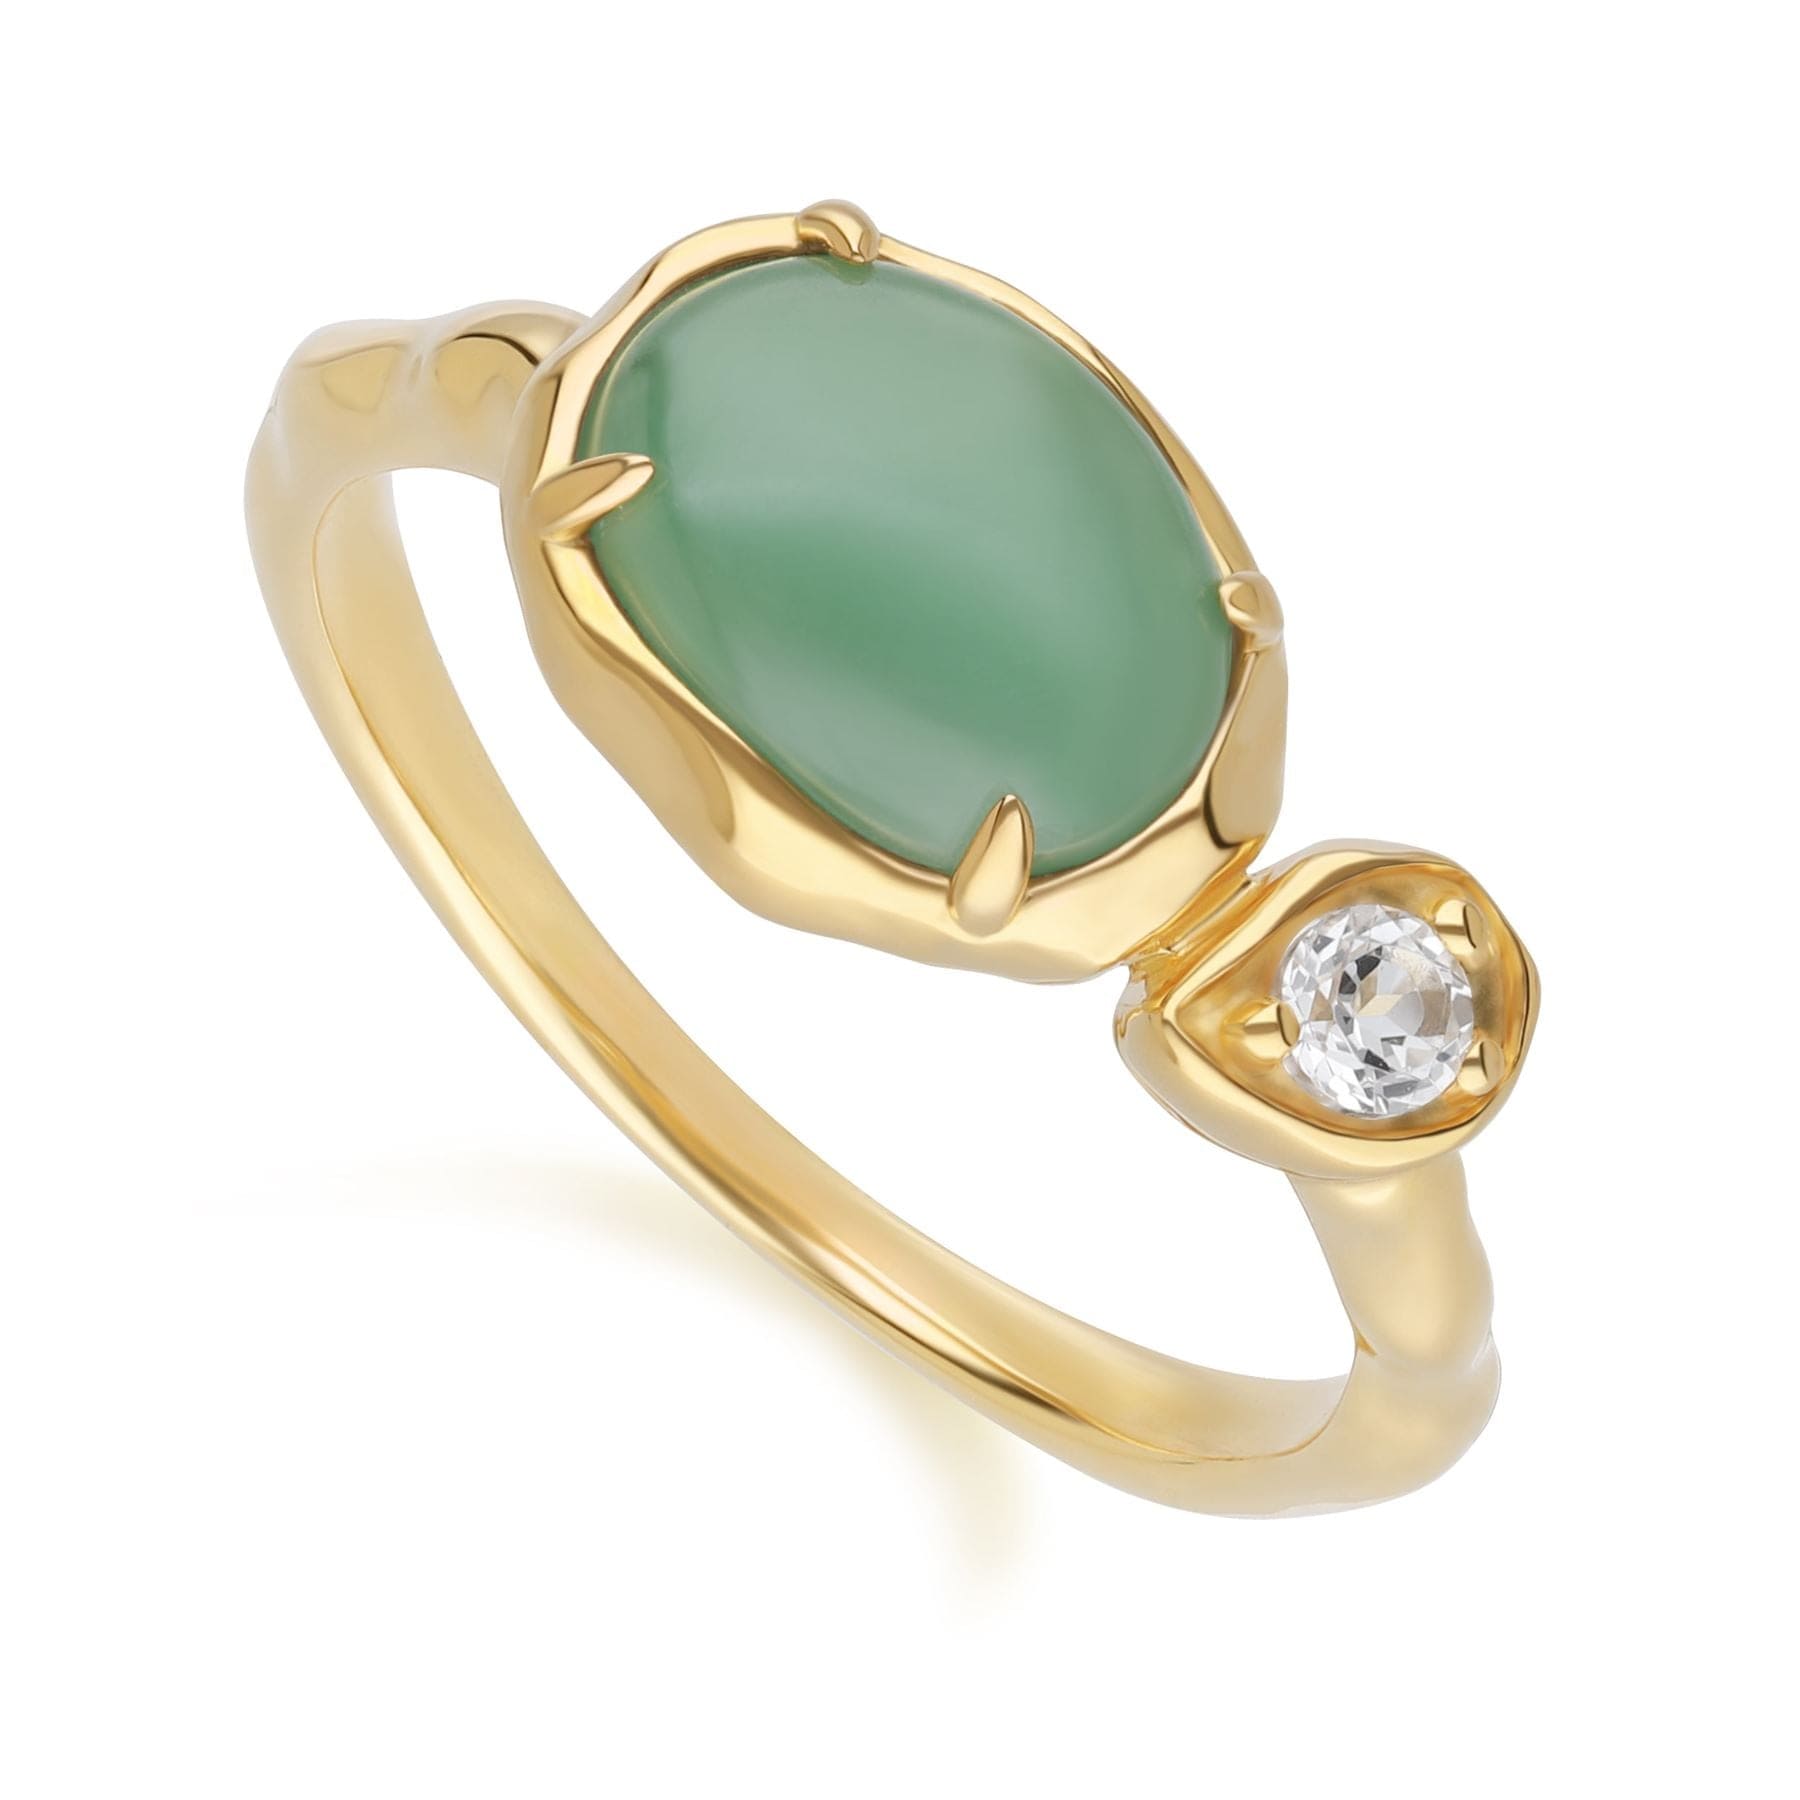 Irregular Oval Dyed Green Jade & Topaz Ring In 18ct Gold Plated SterlIng Silver